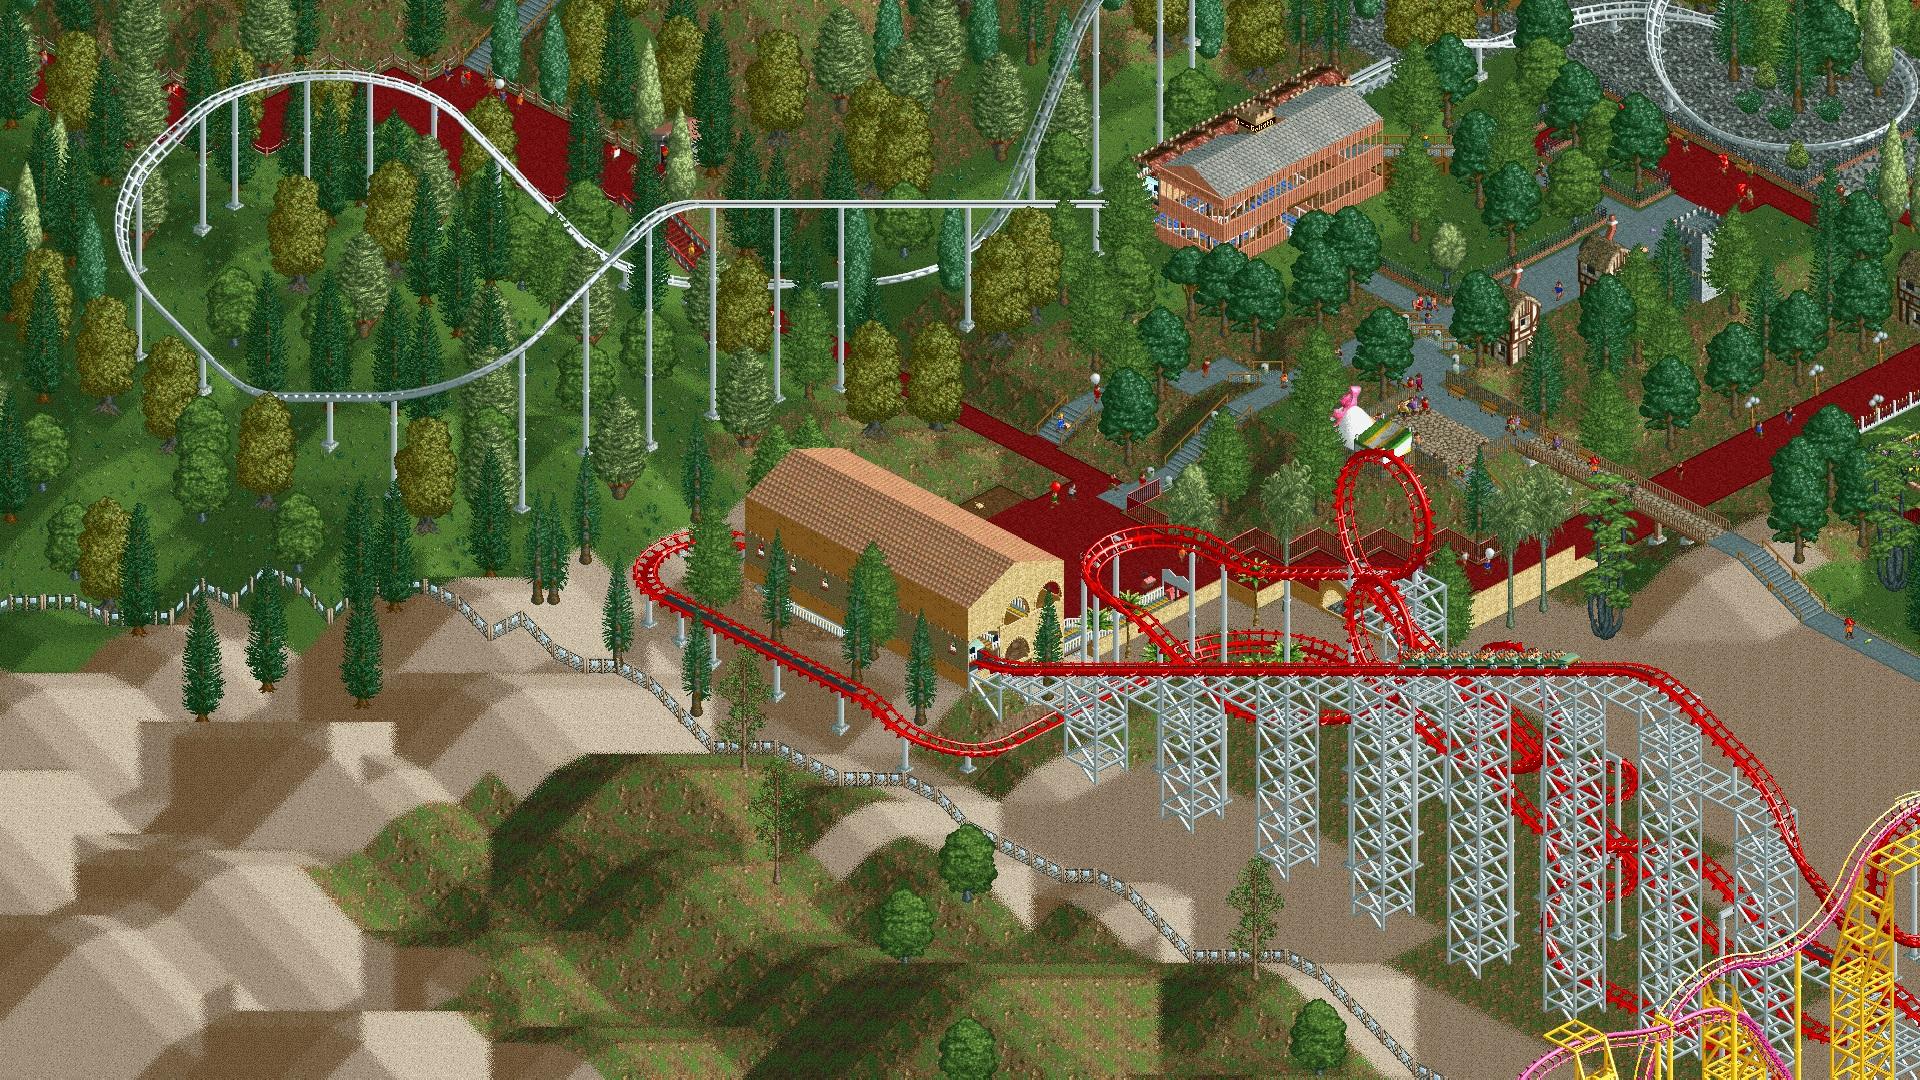 I Built The Most INSANE Theme Park Ever in RollerCoaster Tycoon 2 